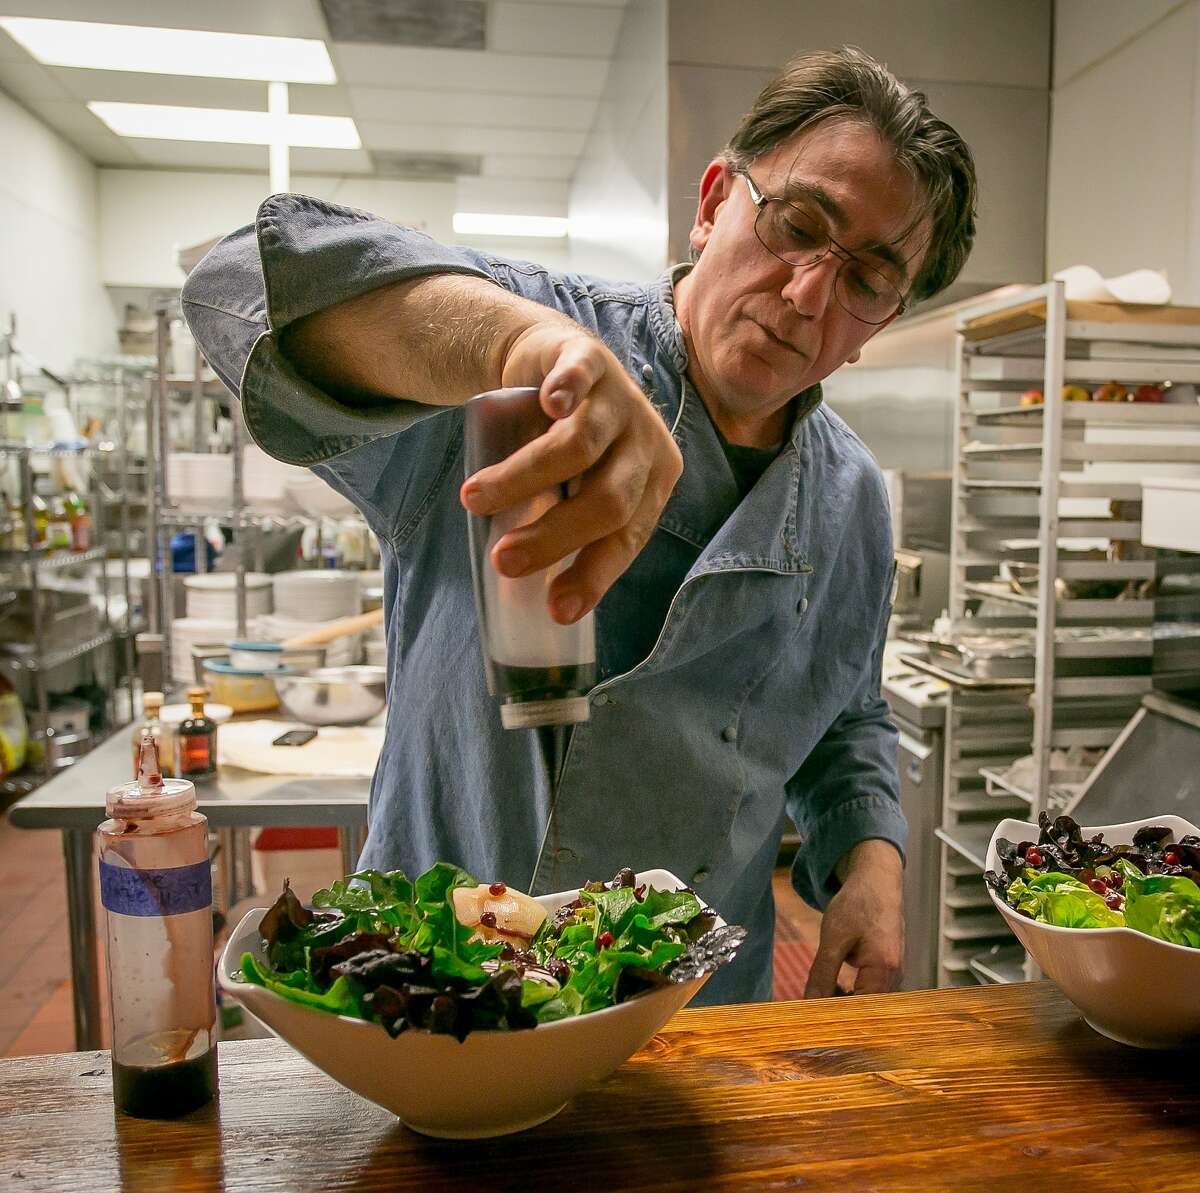 Chef/owner Michael Mazaferri dresses the Gem salad at Aly's on Main in Redwood City, Calif., on January 21st, 2014.